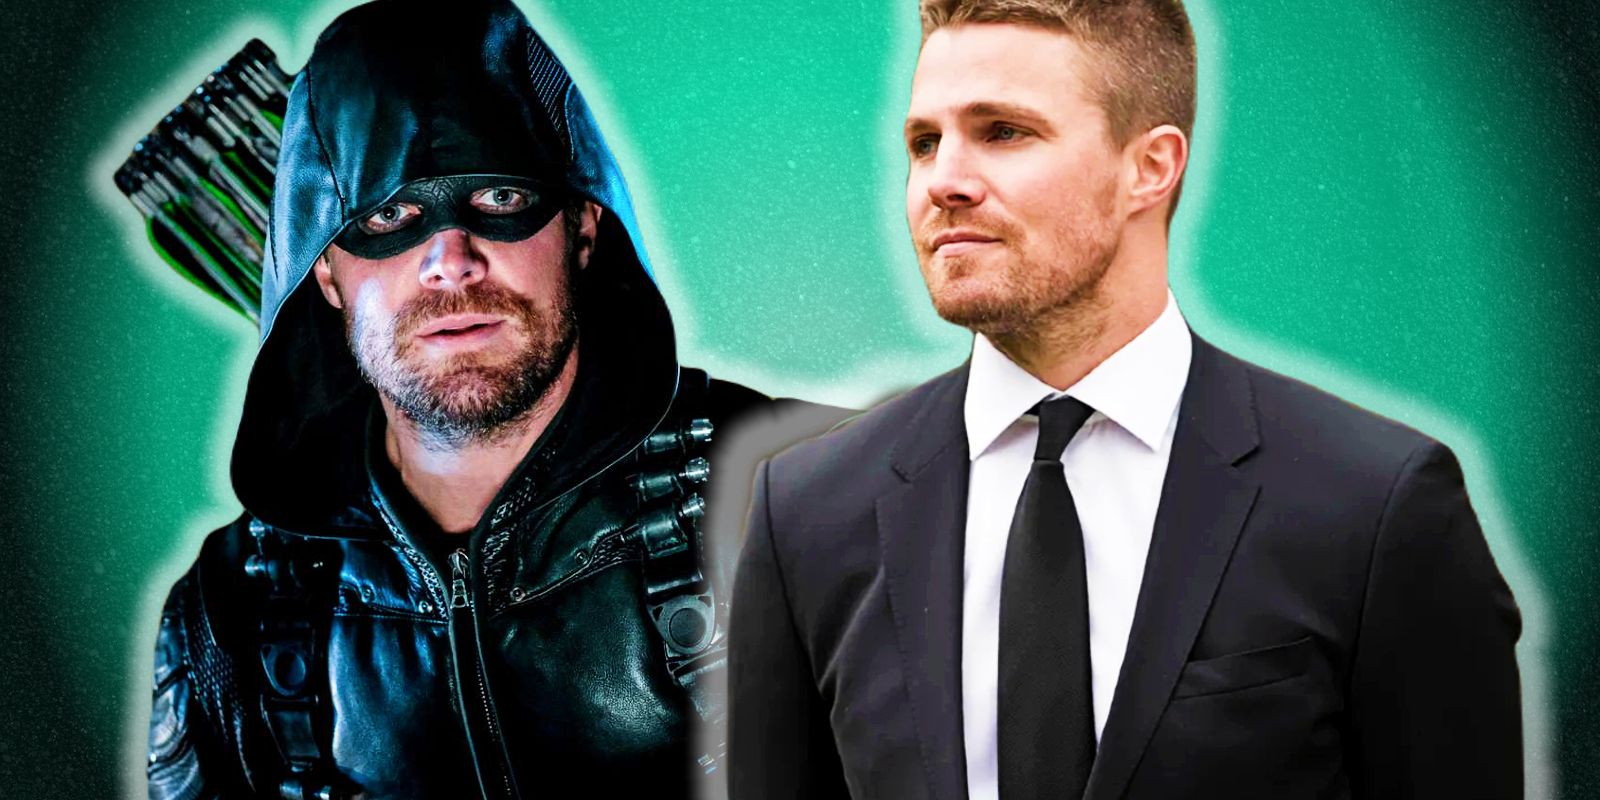 This custom image shows Stephen Amell in his Arrow costume next to him in a suit and tie.